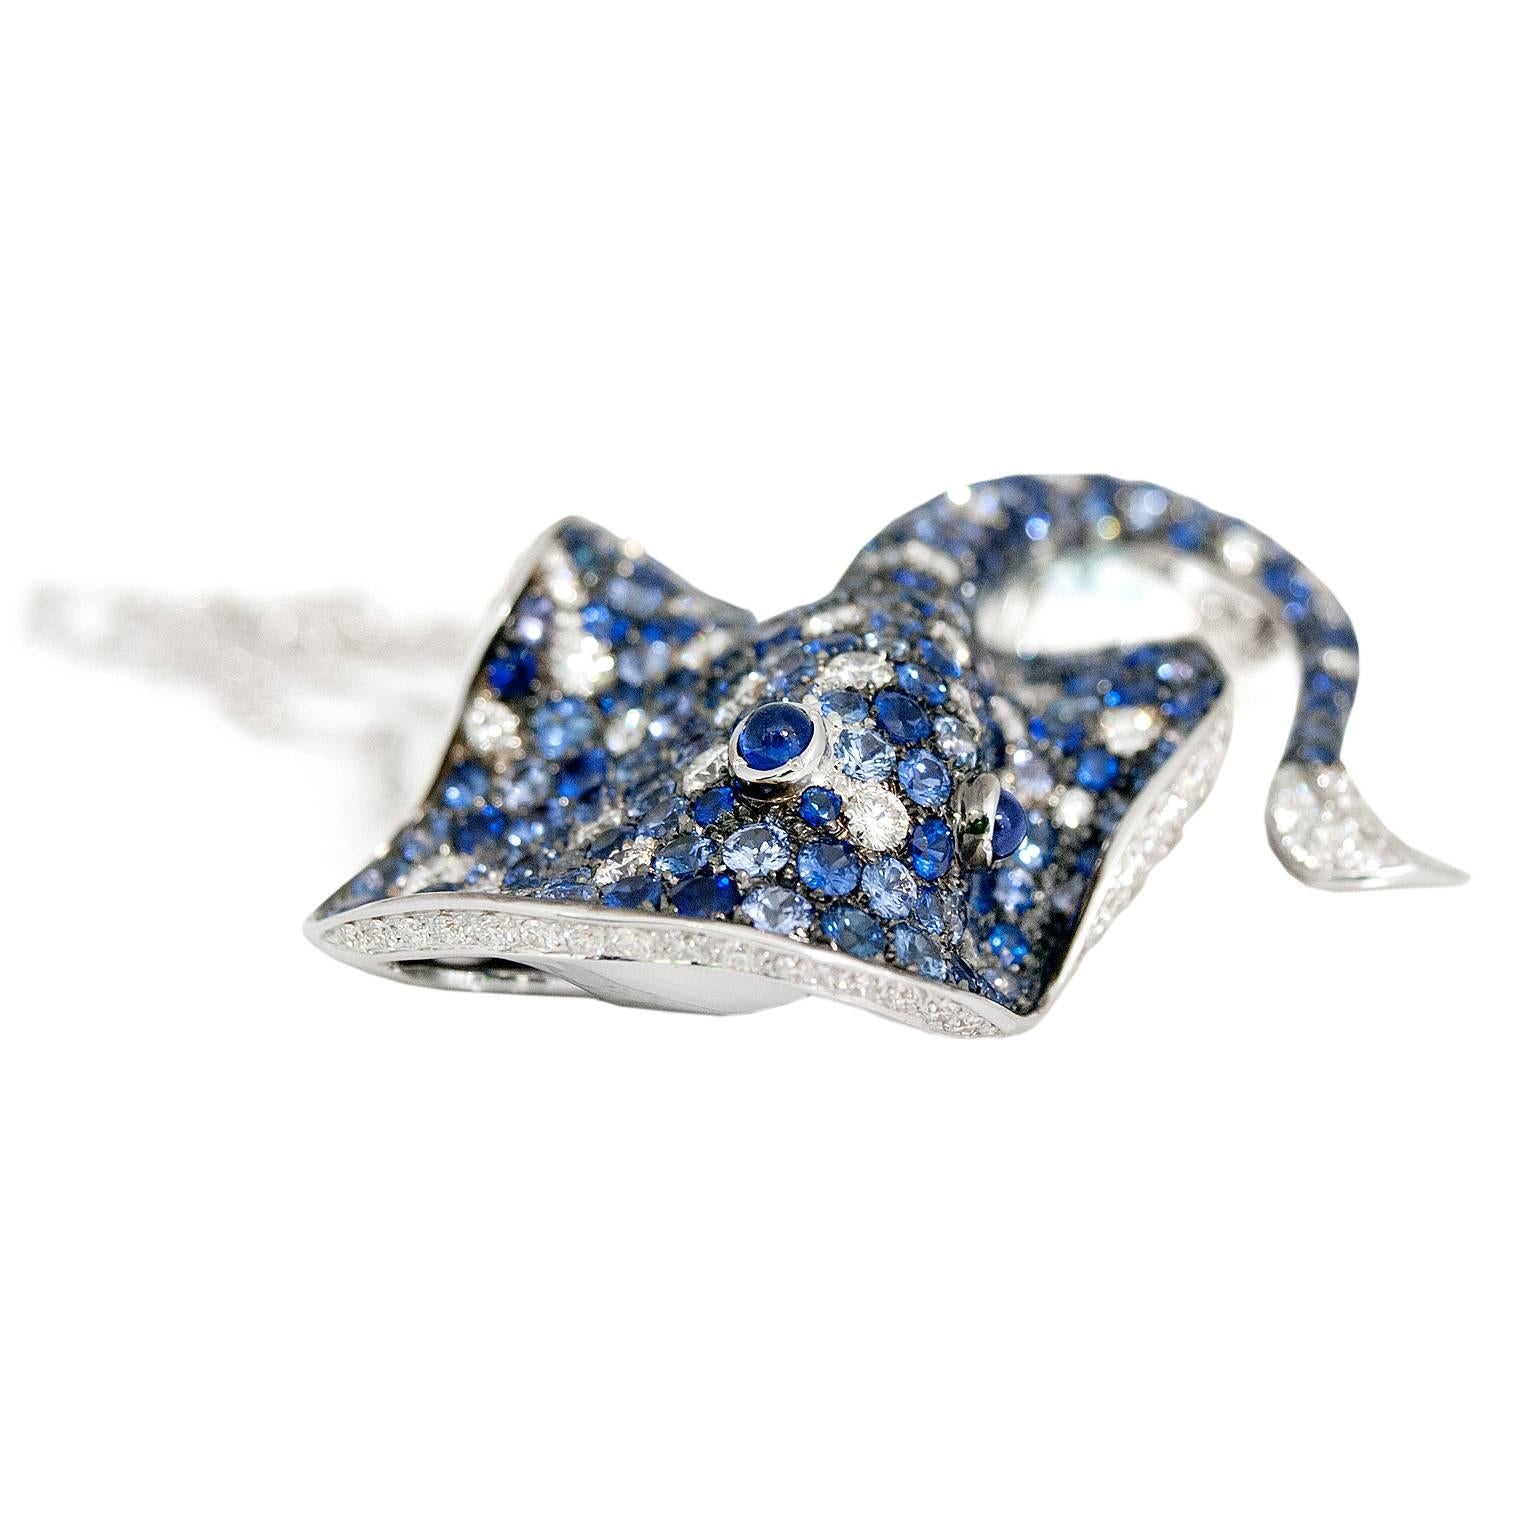 Round Cut Jewelry Ray Fish White Diamond Blue Sapphire 18kt Gold Brooch Pendant / Necklace For Sale